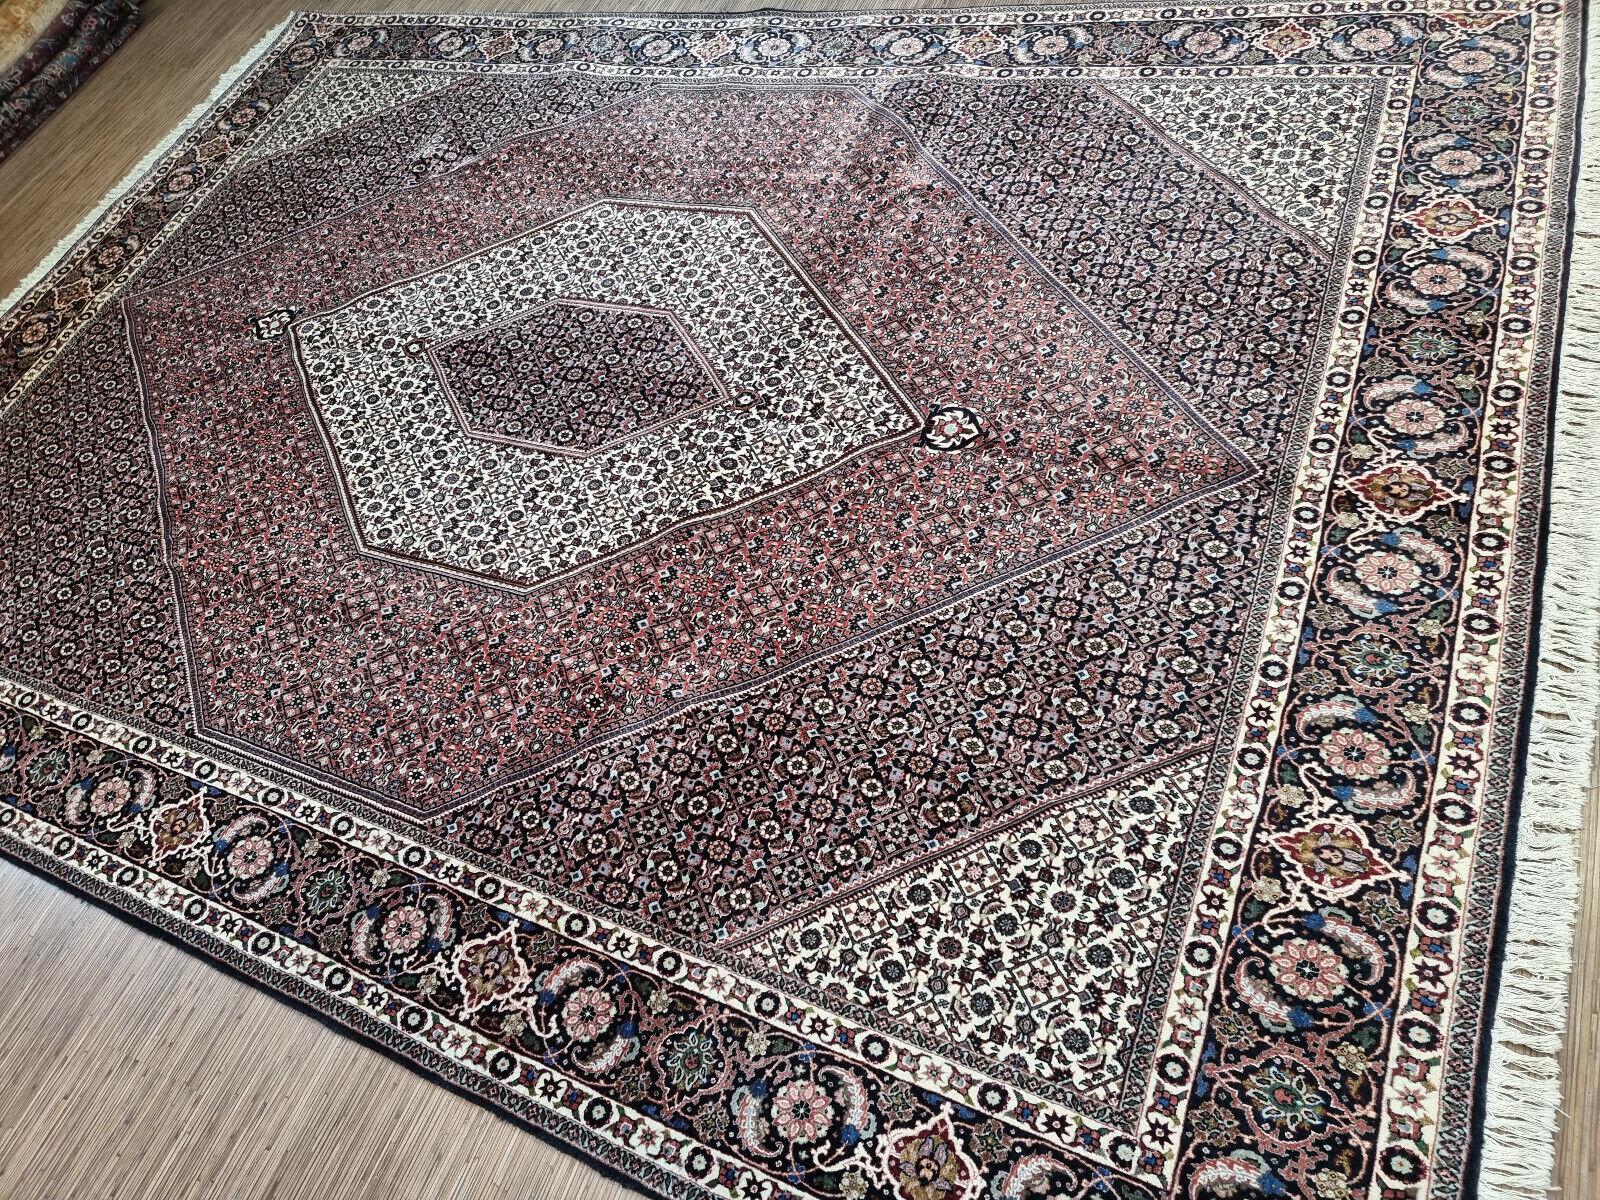 If you are looking for a rug that will add a touch of vintage elegance to your living space, look no further than this Handmade Vintage Persian Style Bidjar Rug. This stunning piece of art showcases the exquisite craftsmanship of the 1970s, when the